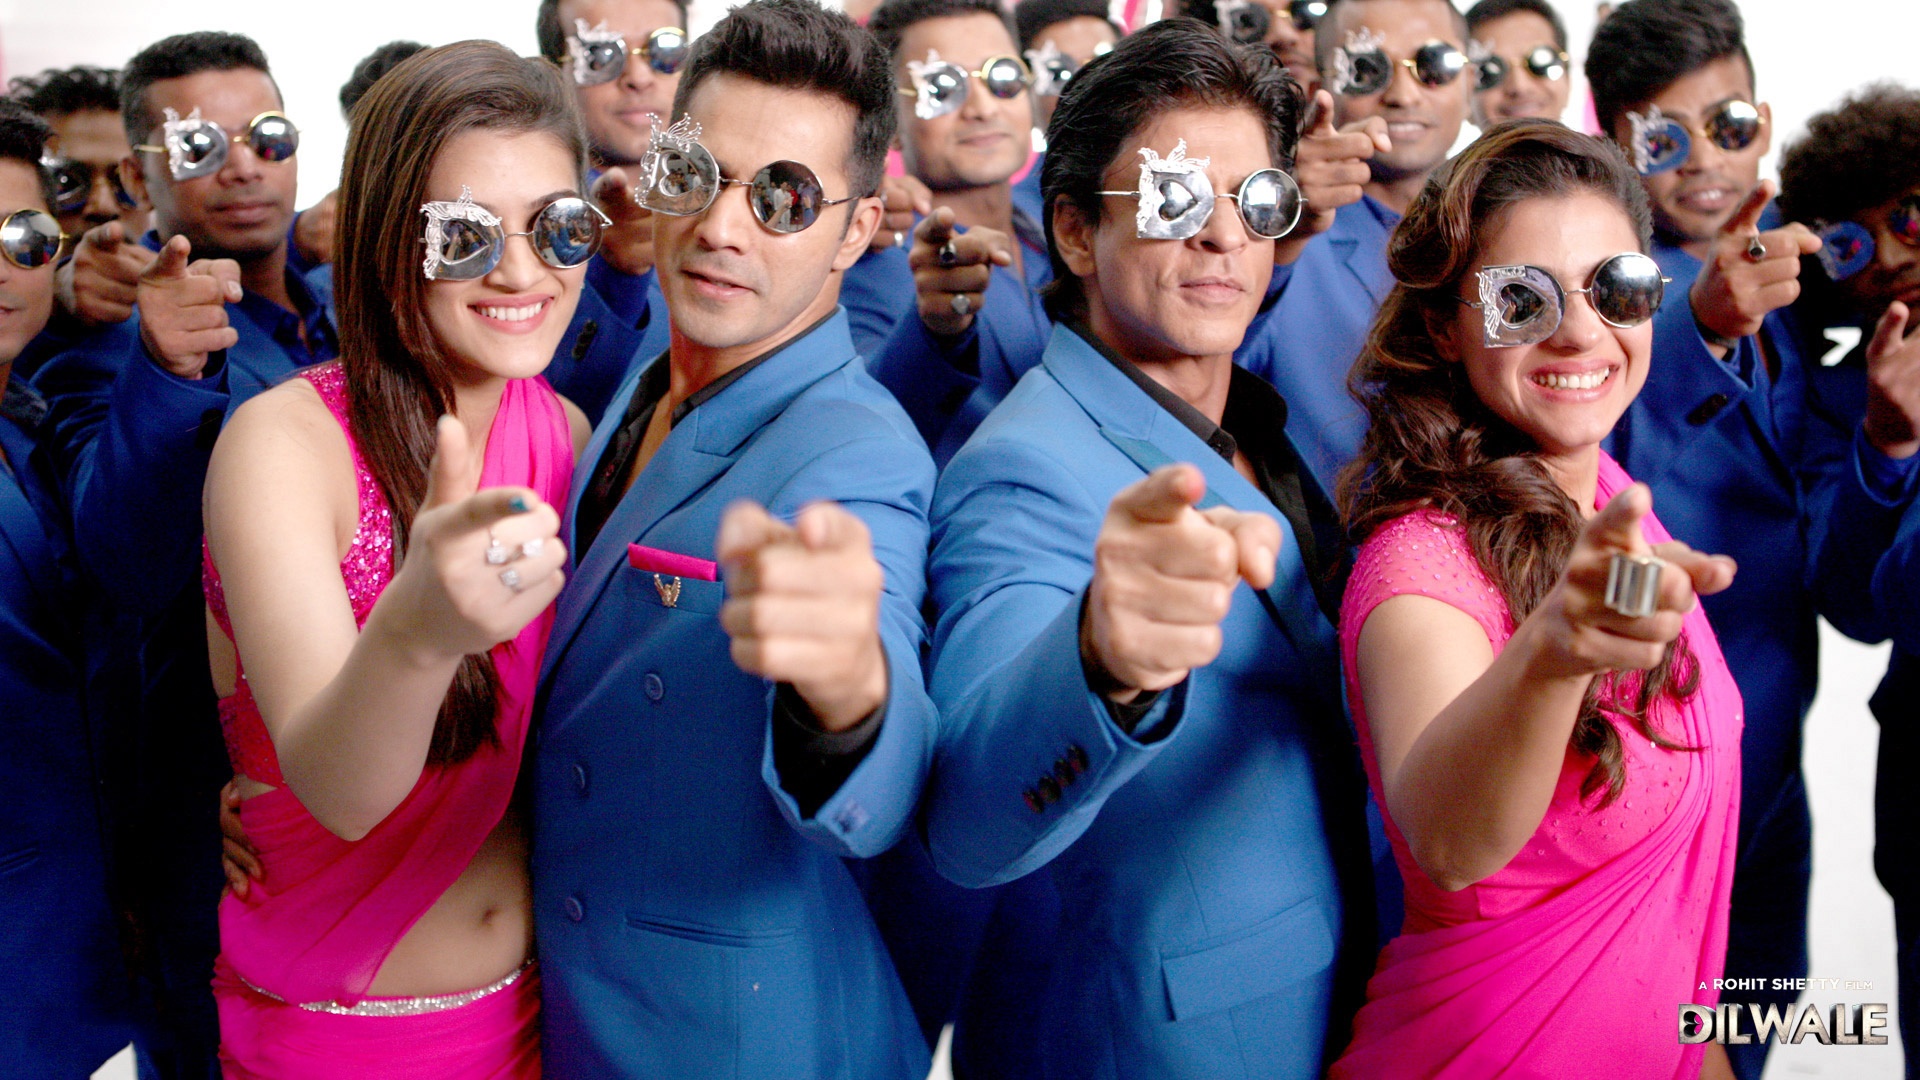 Dilwale Bollywood Movie Wallpapers   1920x1080   717837 1920x1080